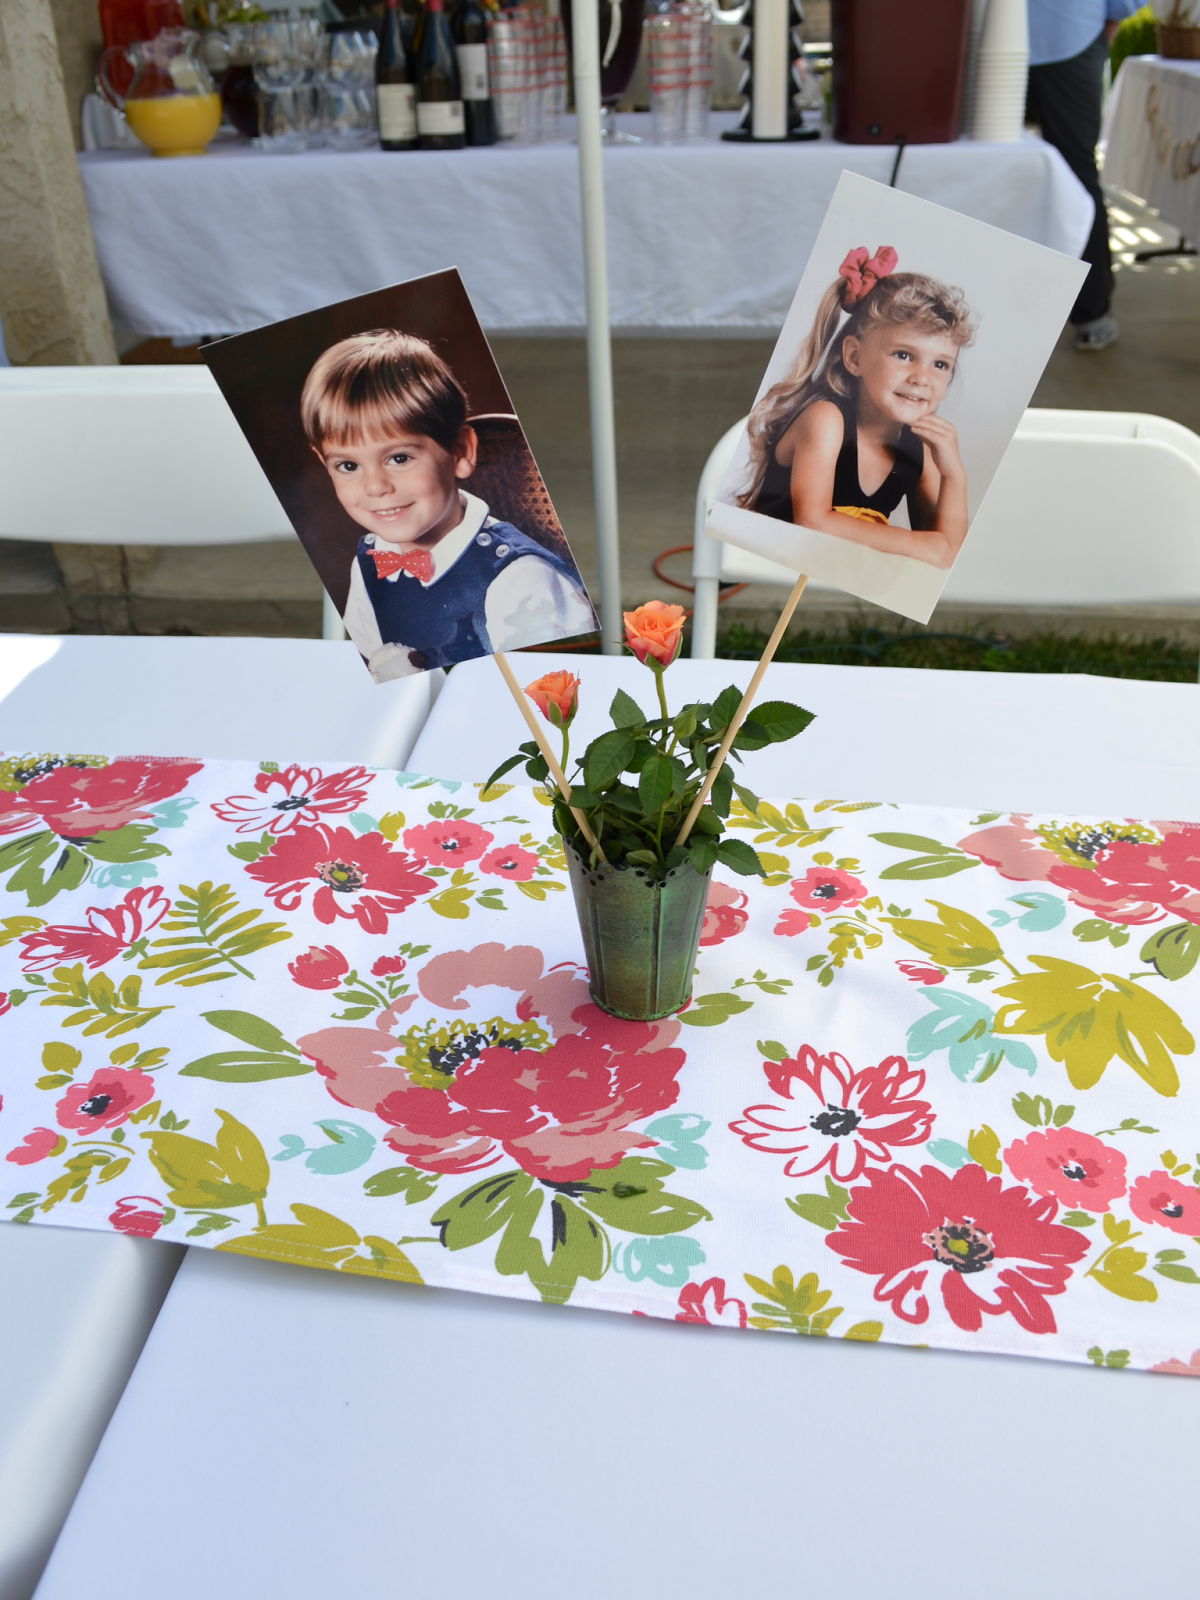 Engagement party champagne brunch table setting childhood photos